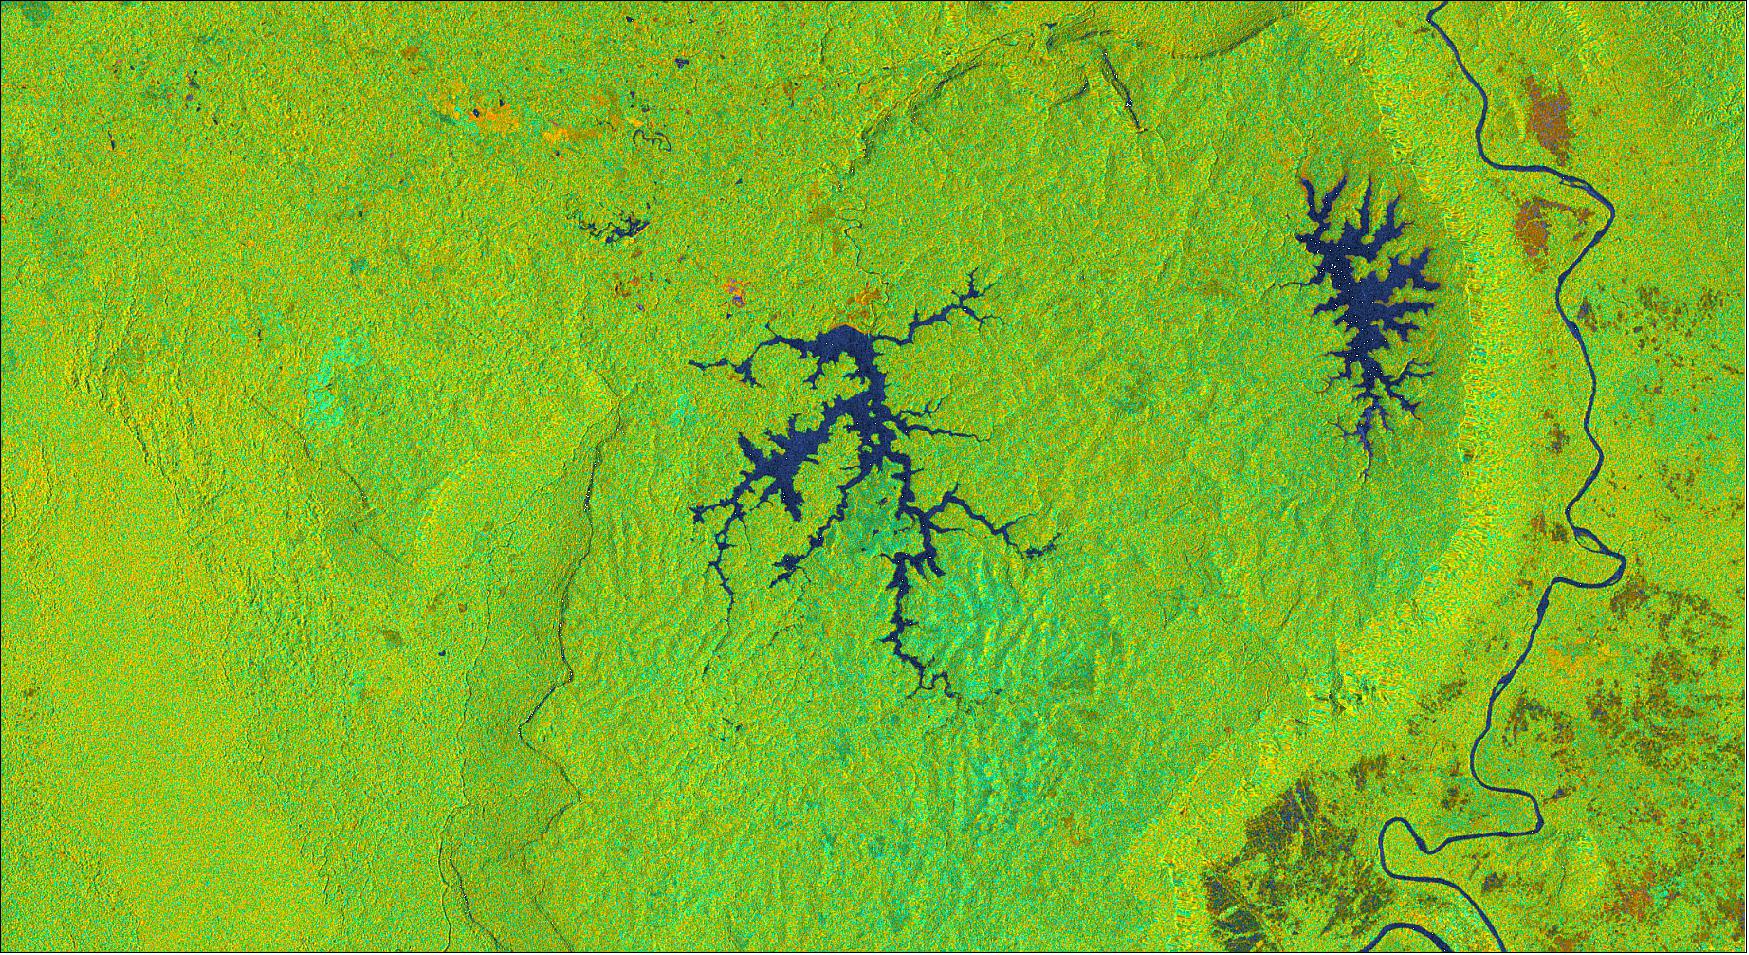 Figure 19: The Sentinel-1 satellite image from ESA's (European Space Agency) Copernicus program observed the area surrounding the Xepian-Xe Nam Noy dam in Laos before the dam's failure on July 17, 2018 (image credit: NASA Disasters/Marshall Space Flight Center/Alaska Satellite Facility; the image contains modified Copernicus Sentinel data (2018) processed by ESA)